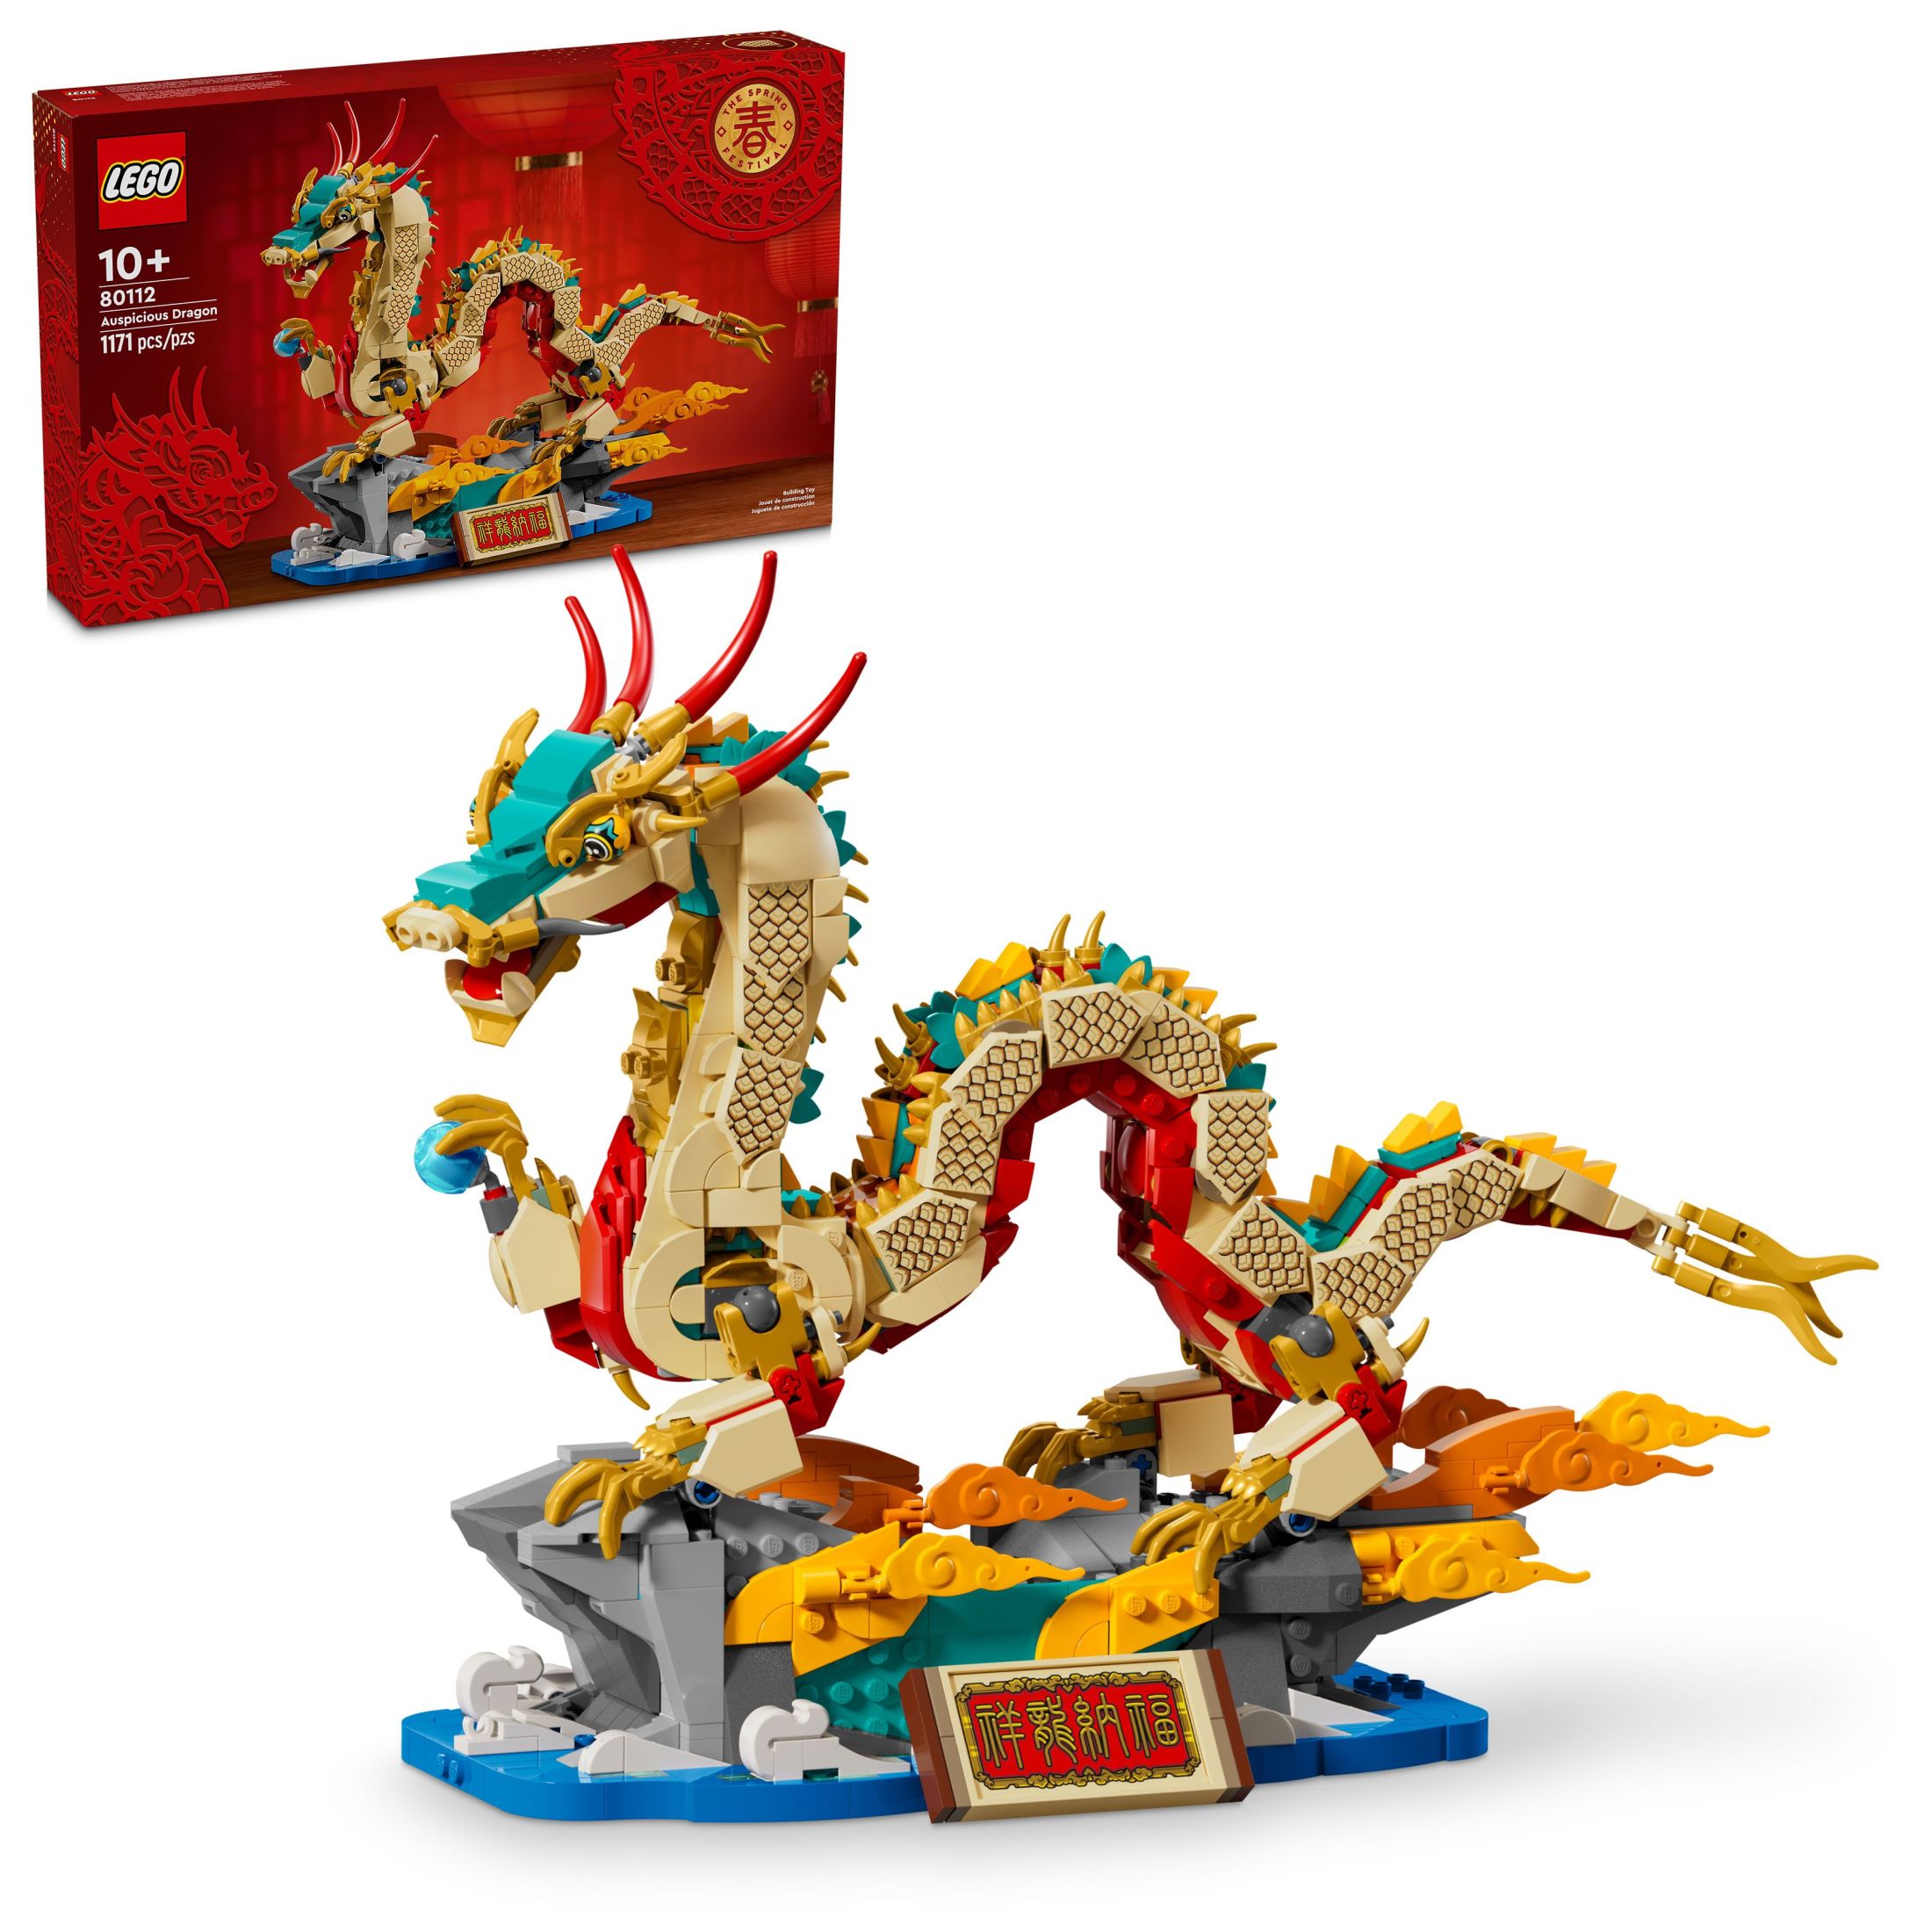 LEGO Spring Festival Auspicious Dragon Buildable Figure, Educational Toy for Kids, Dragon Toy Building Set, Great Spring Festival Decoration or Unique Gift for Boys and Girls Ages 10 and Up, 80112 - image 1 of 9